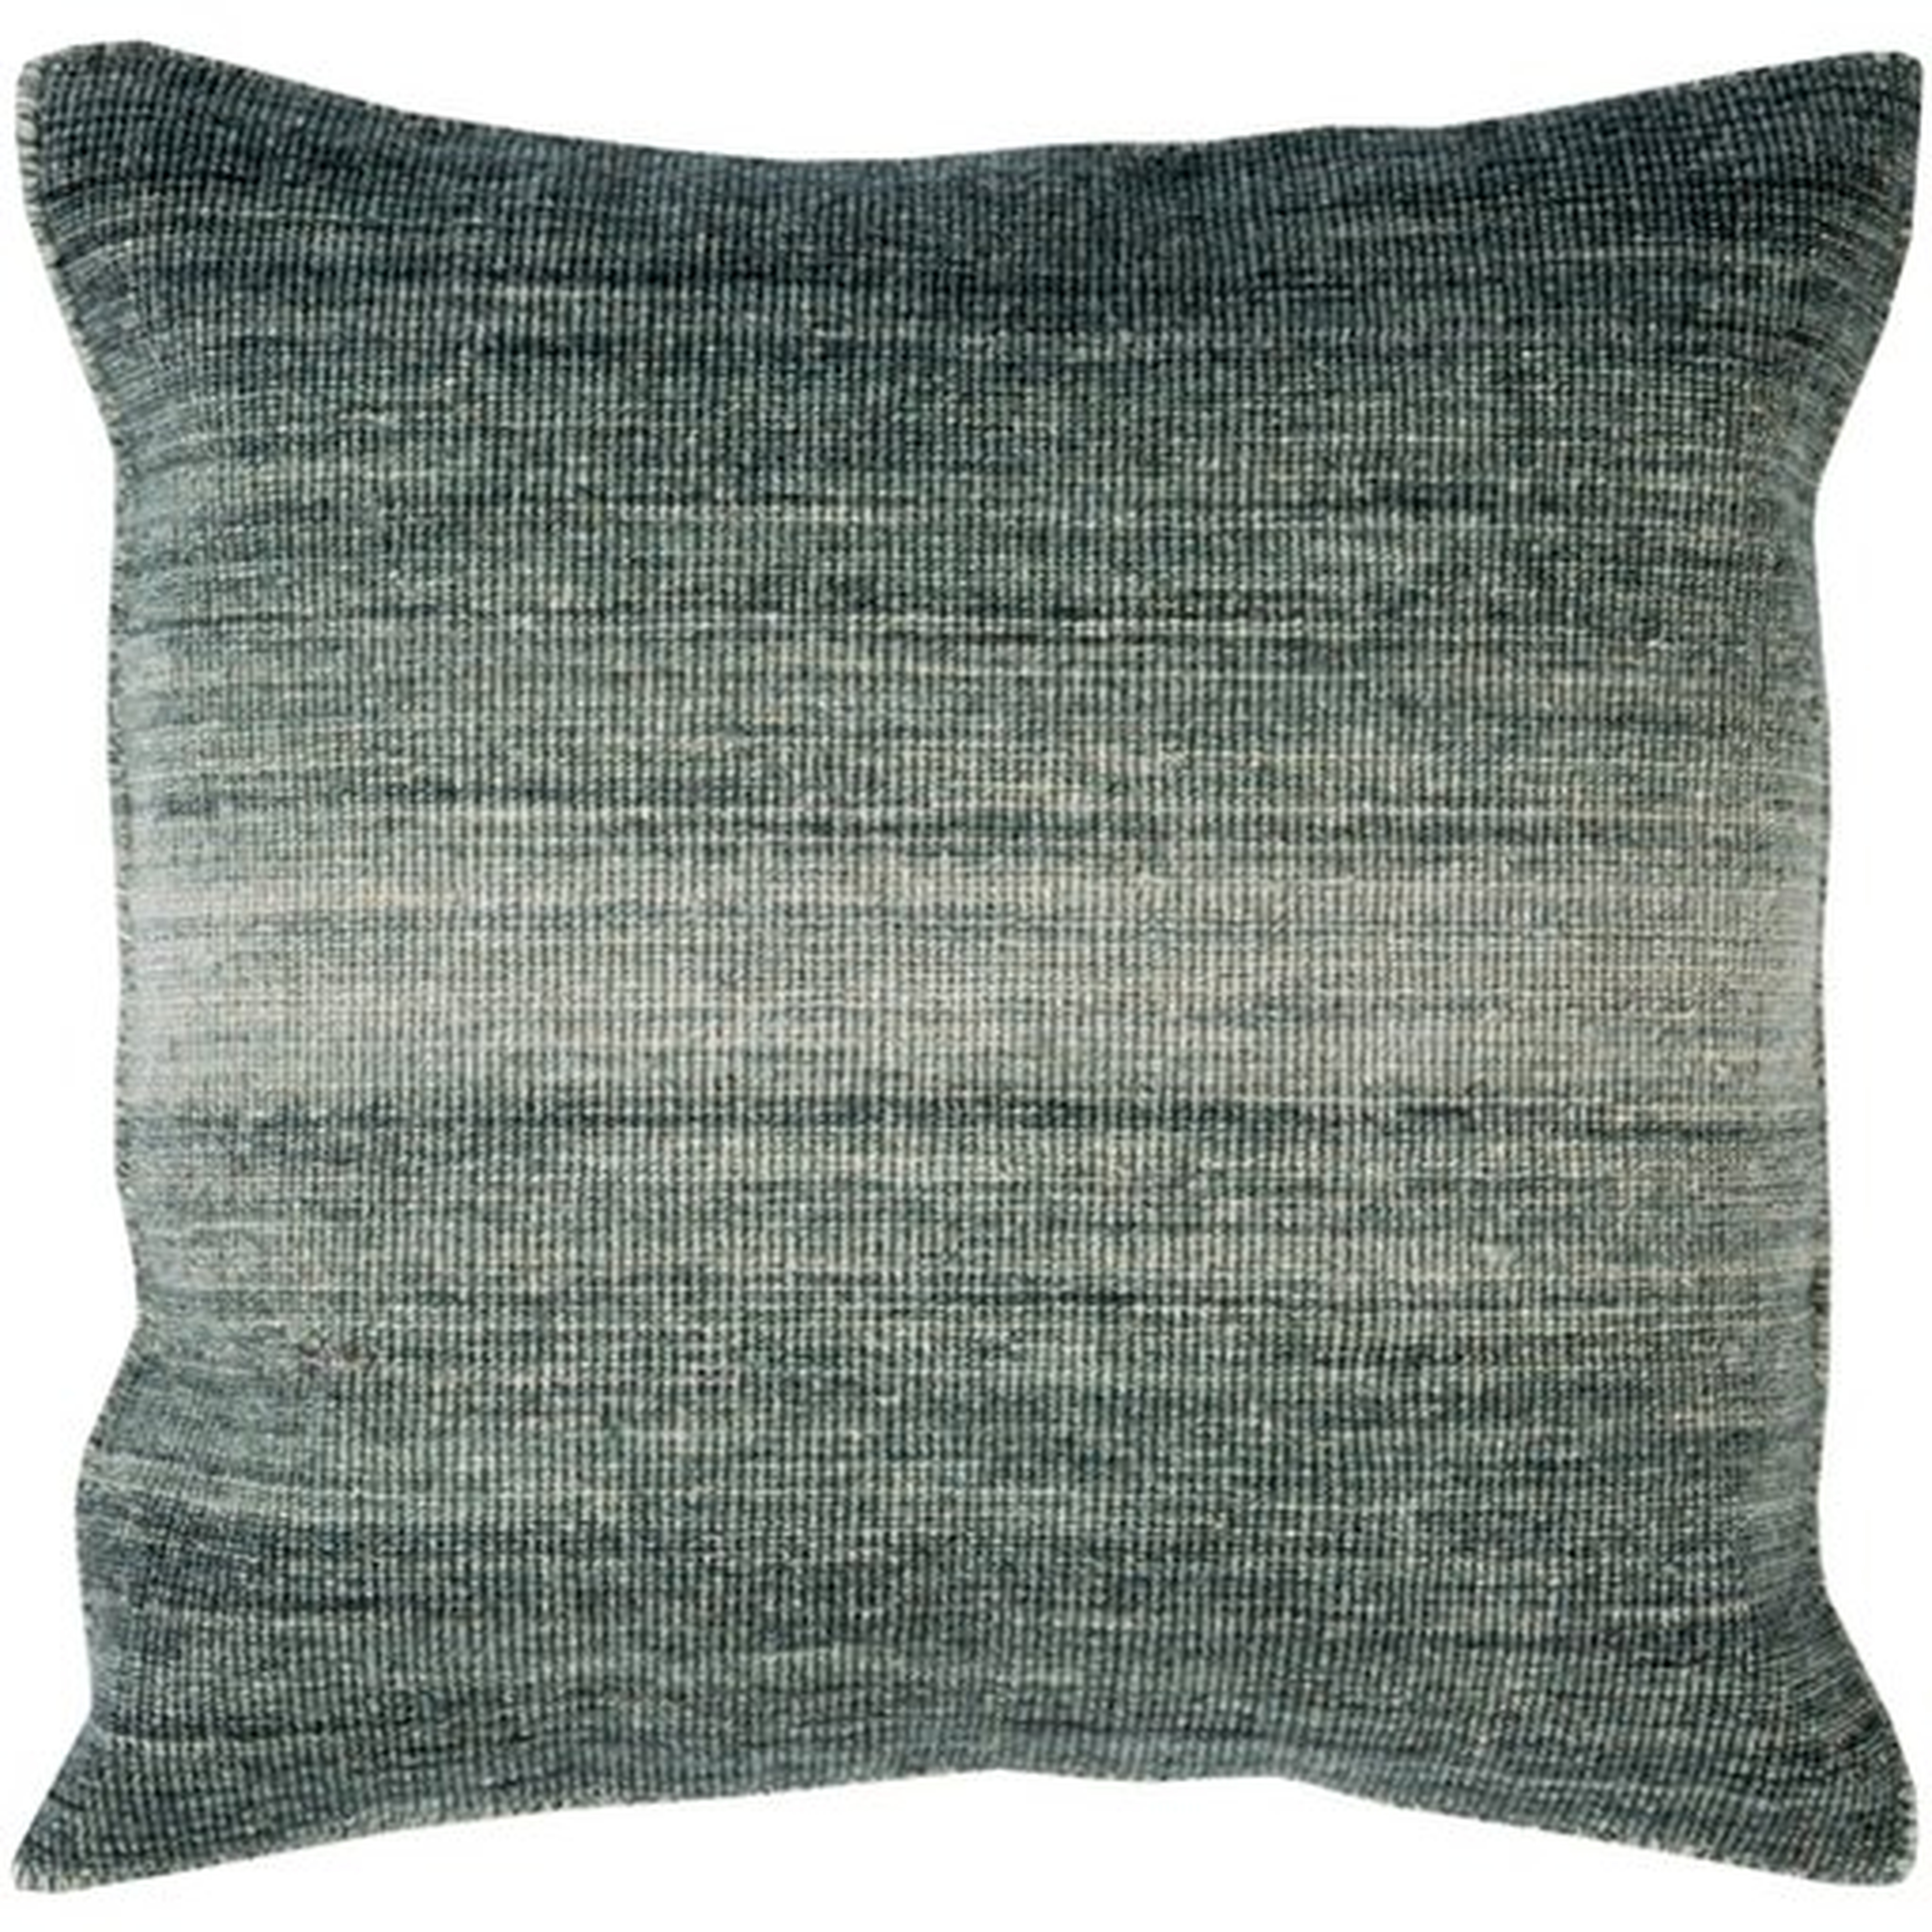 Chaz 18" Pillow with Down insert - Surya